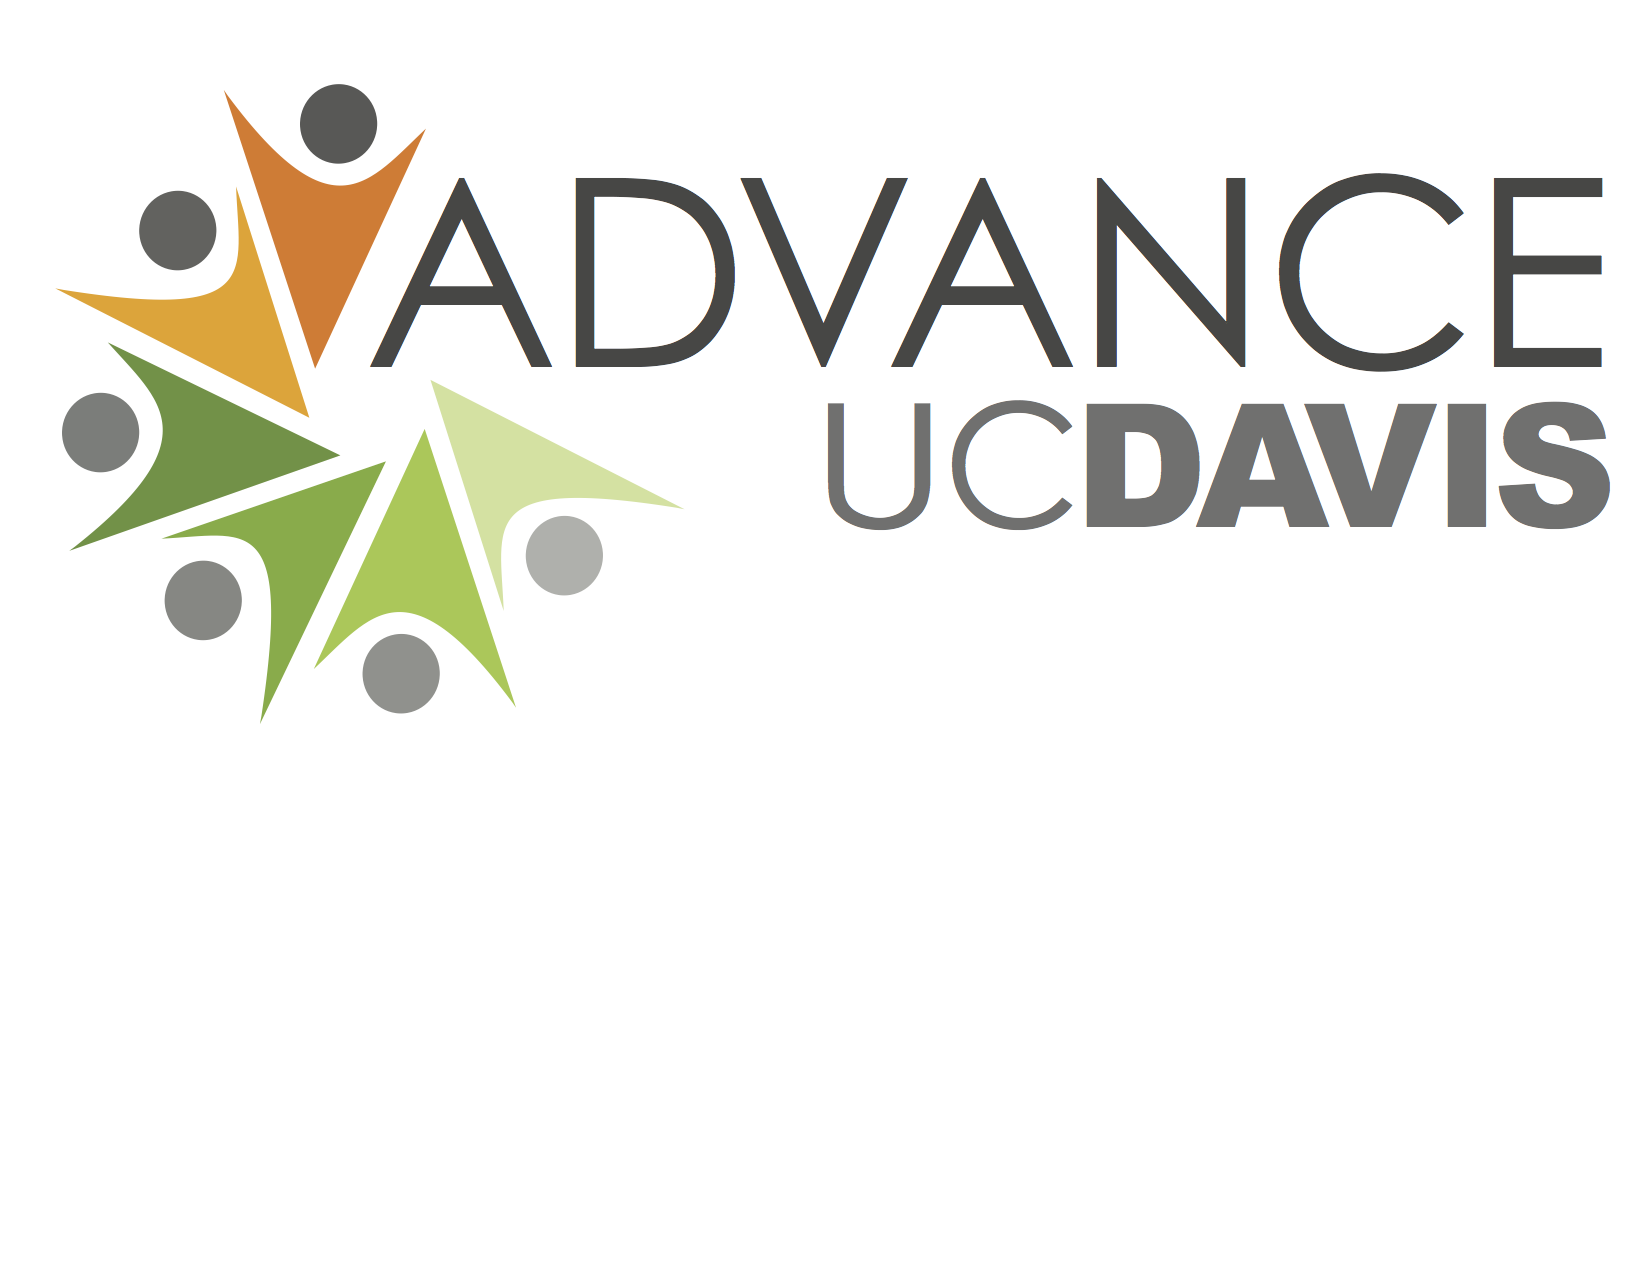 UC Davis ADVANCE is working to build and sustain a diverse community of STEM faculty.